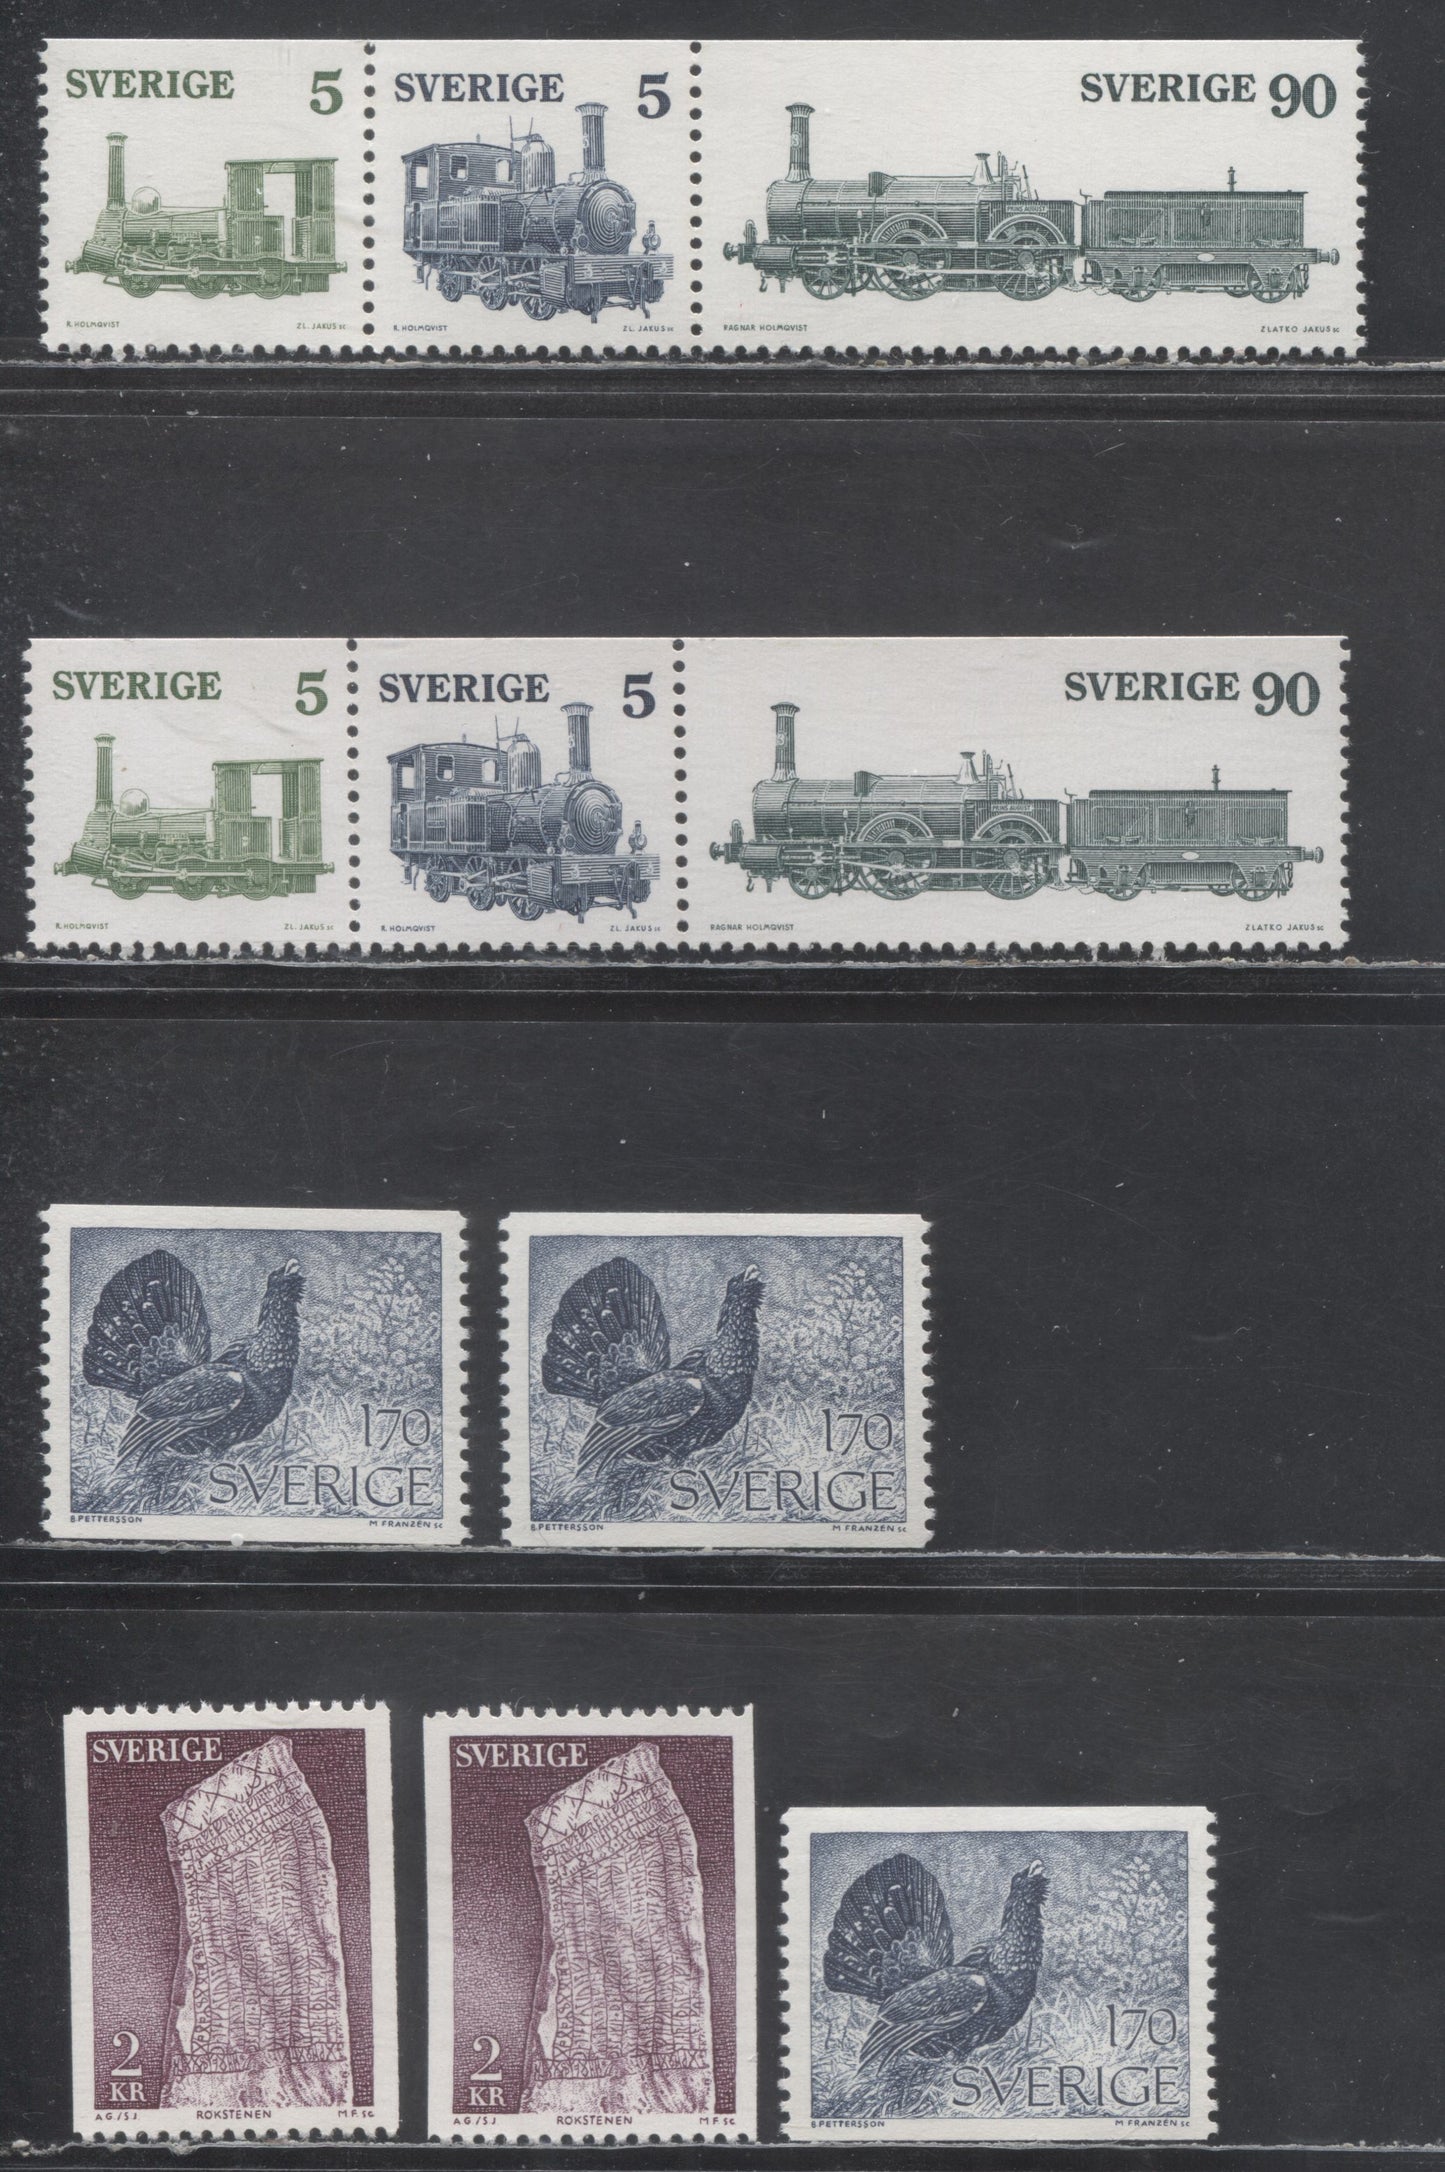 Lot 25 Sweden SC#1119/1136 1975 Capercaille & Rok Stone - 1975 Trains issues, With Strong And Weak Tagging, 11 VFNH Singles, Click on Listing to See ALL Pictures, Estimated Value $15